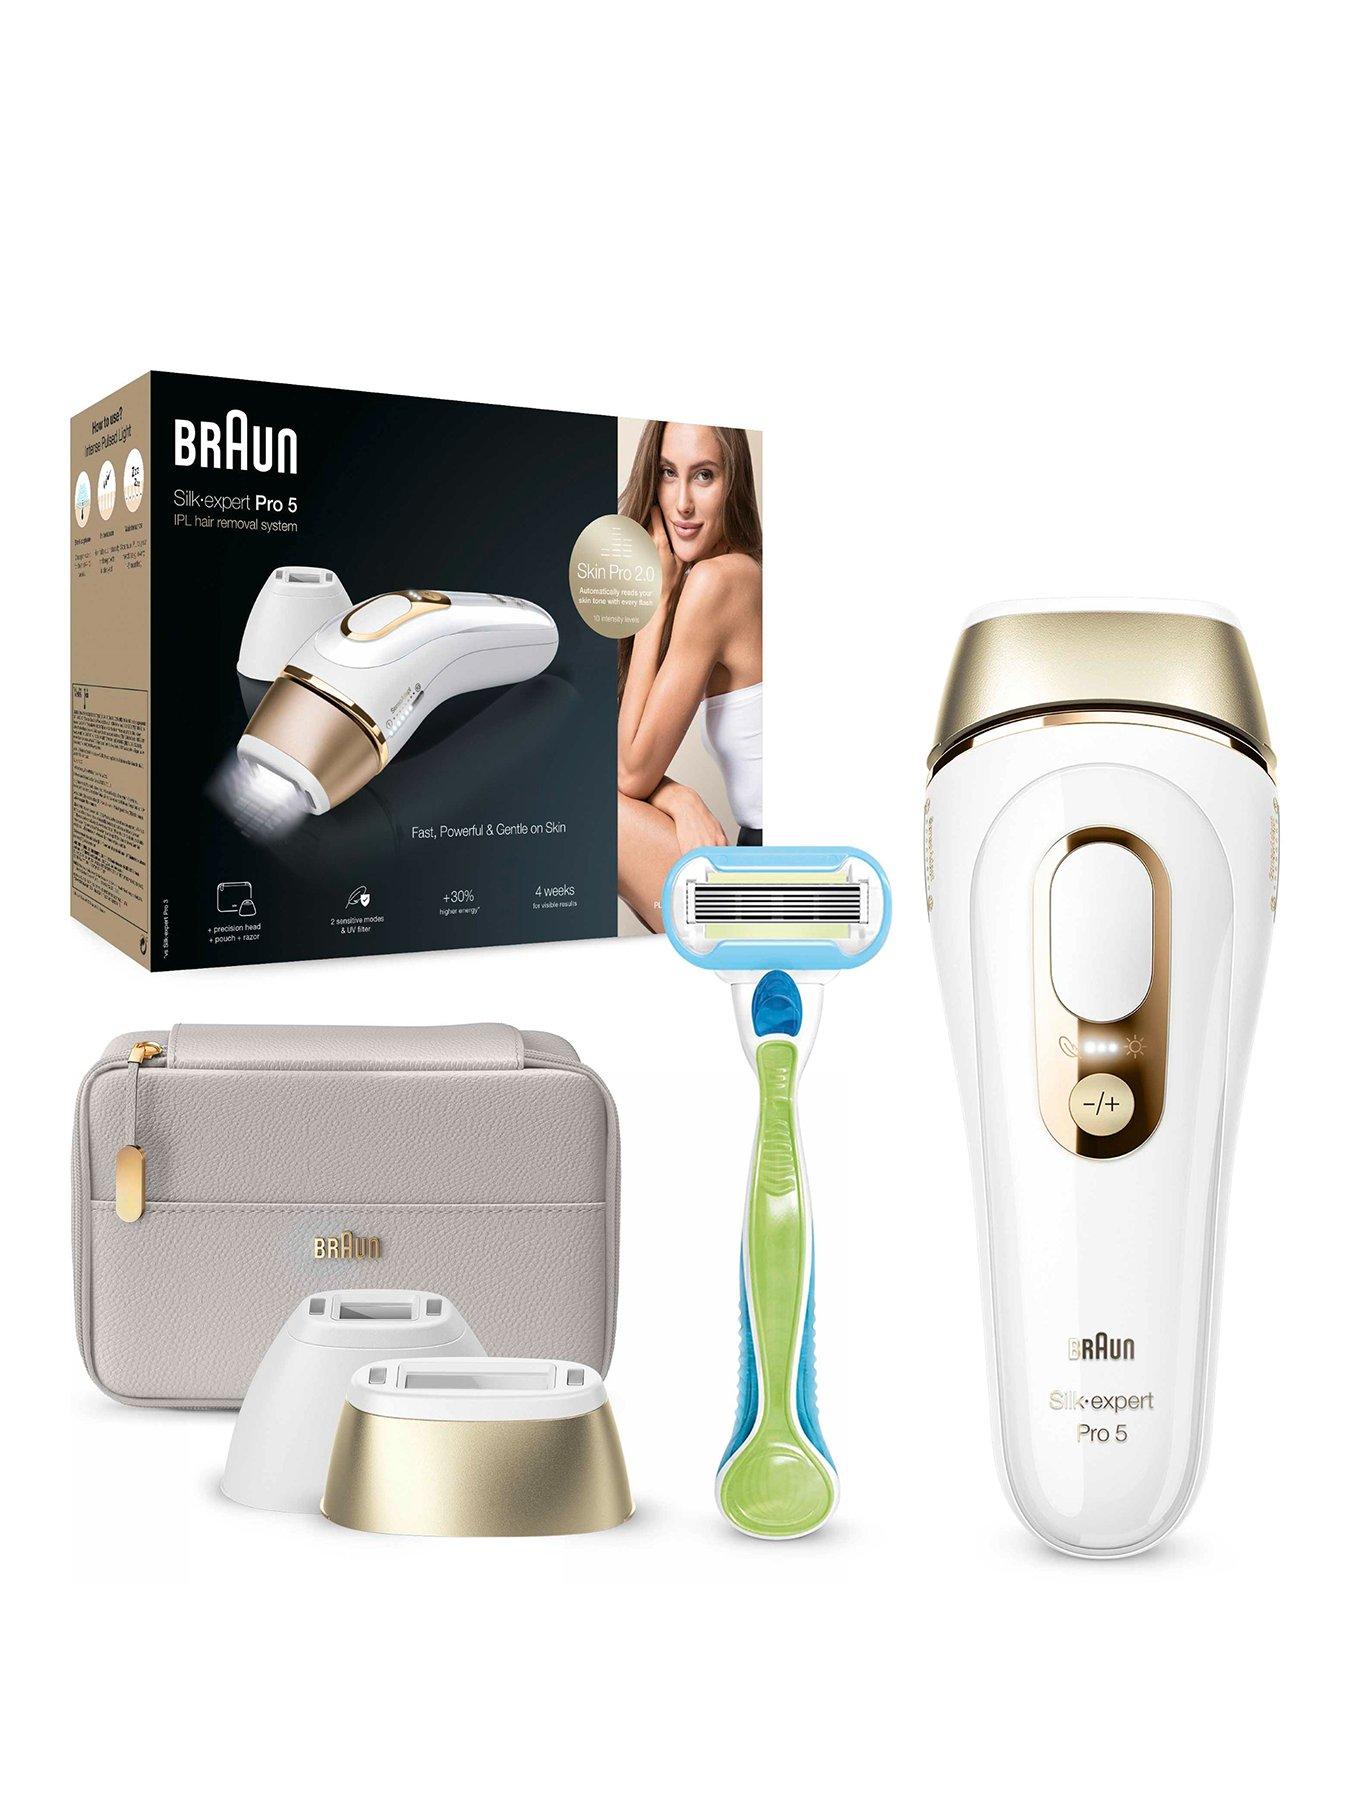 Braun Silk-épil 9 Epilator for Long-Lasting Hair Removal with Electric  Shaver & Trimmer, Bikini Trimmer & Exfoliator, 100% Waterproof, UK 2 Pin  Plug, 9-980, Rose Gold : : Beauty & Personal Care